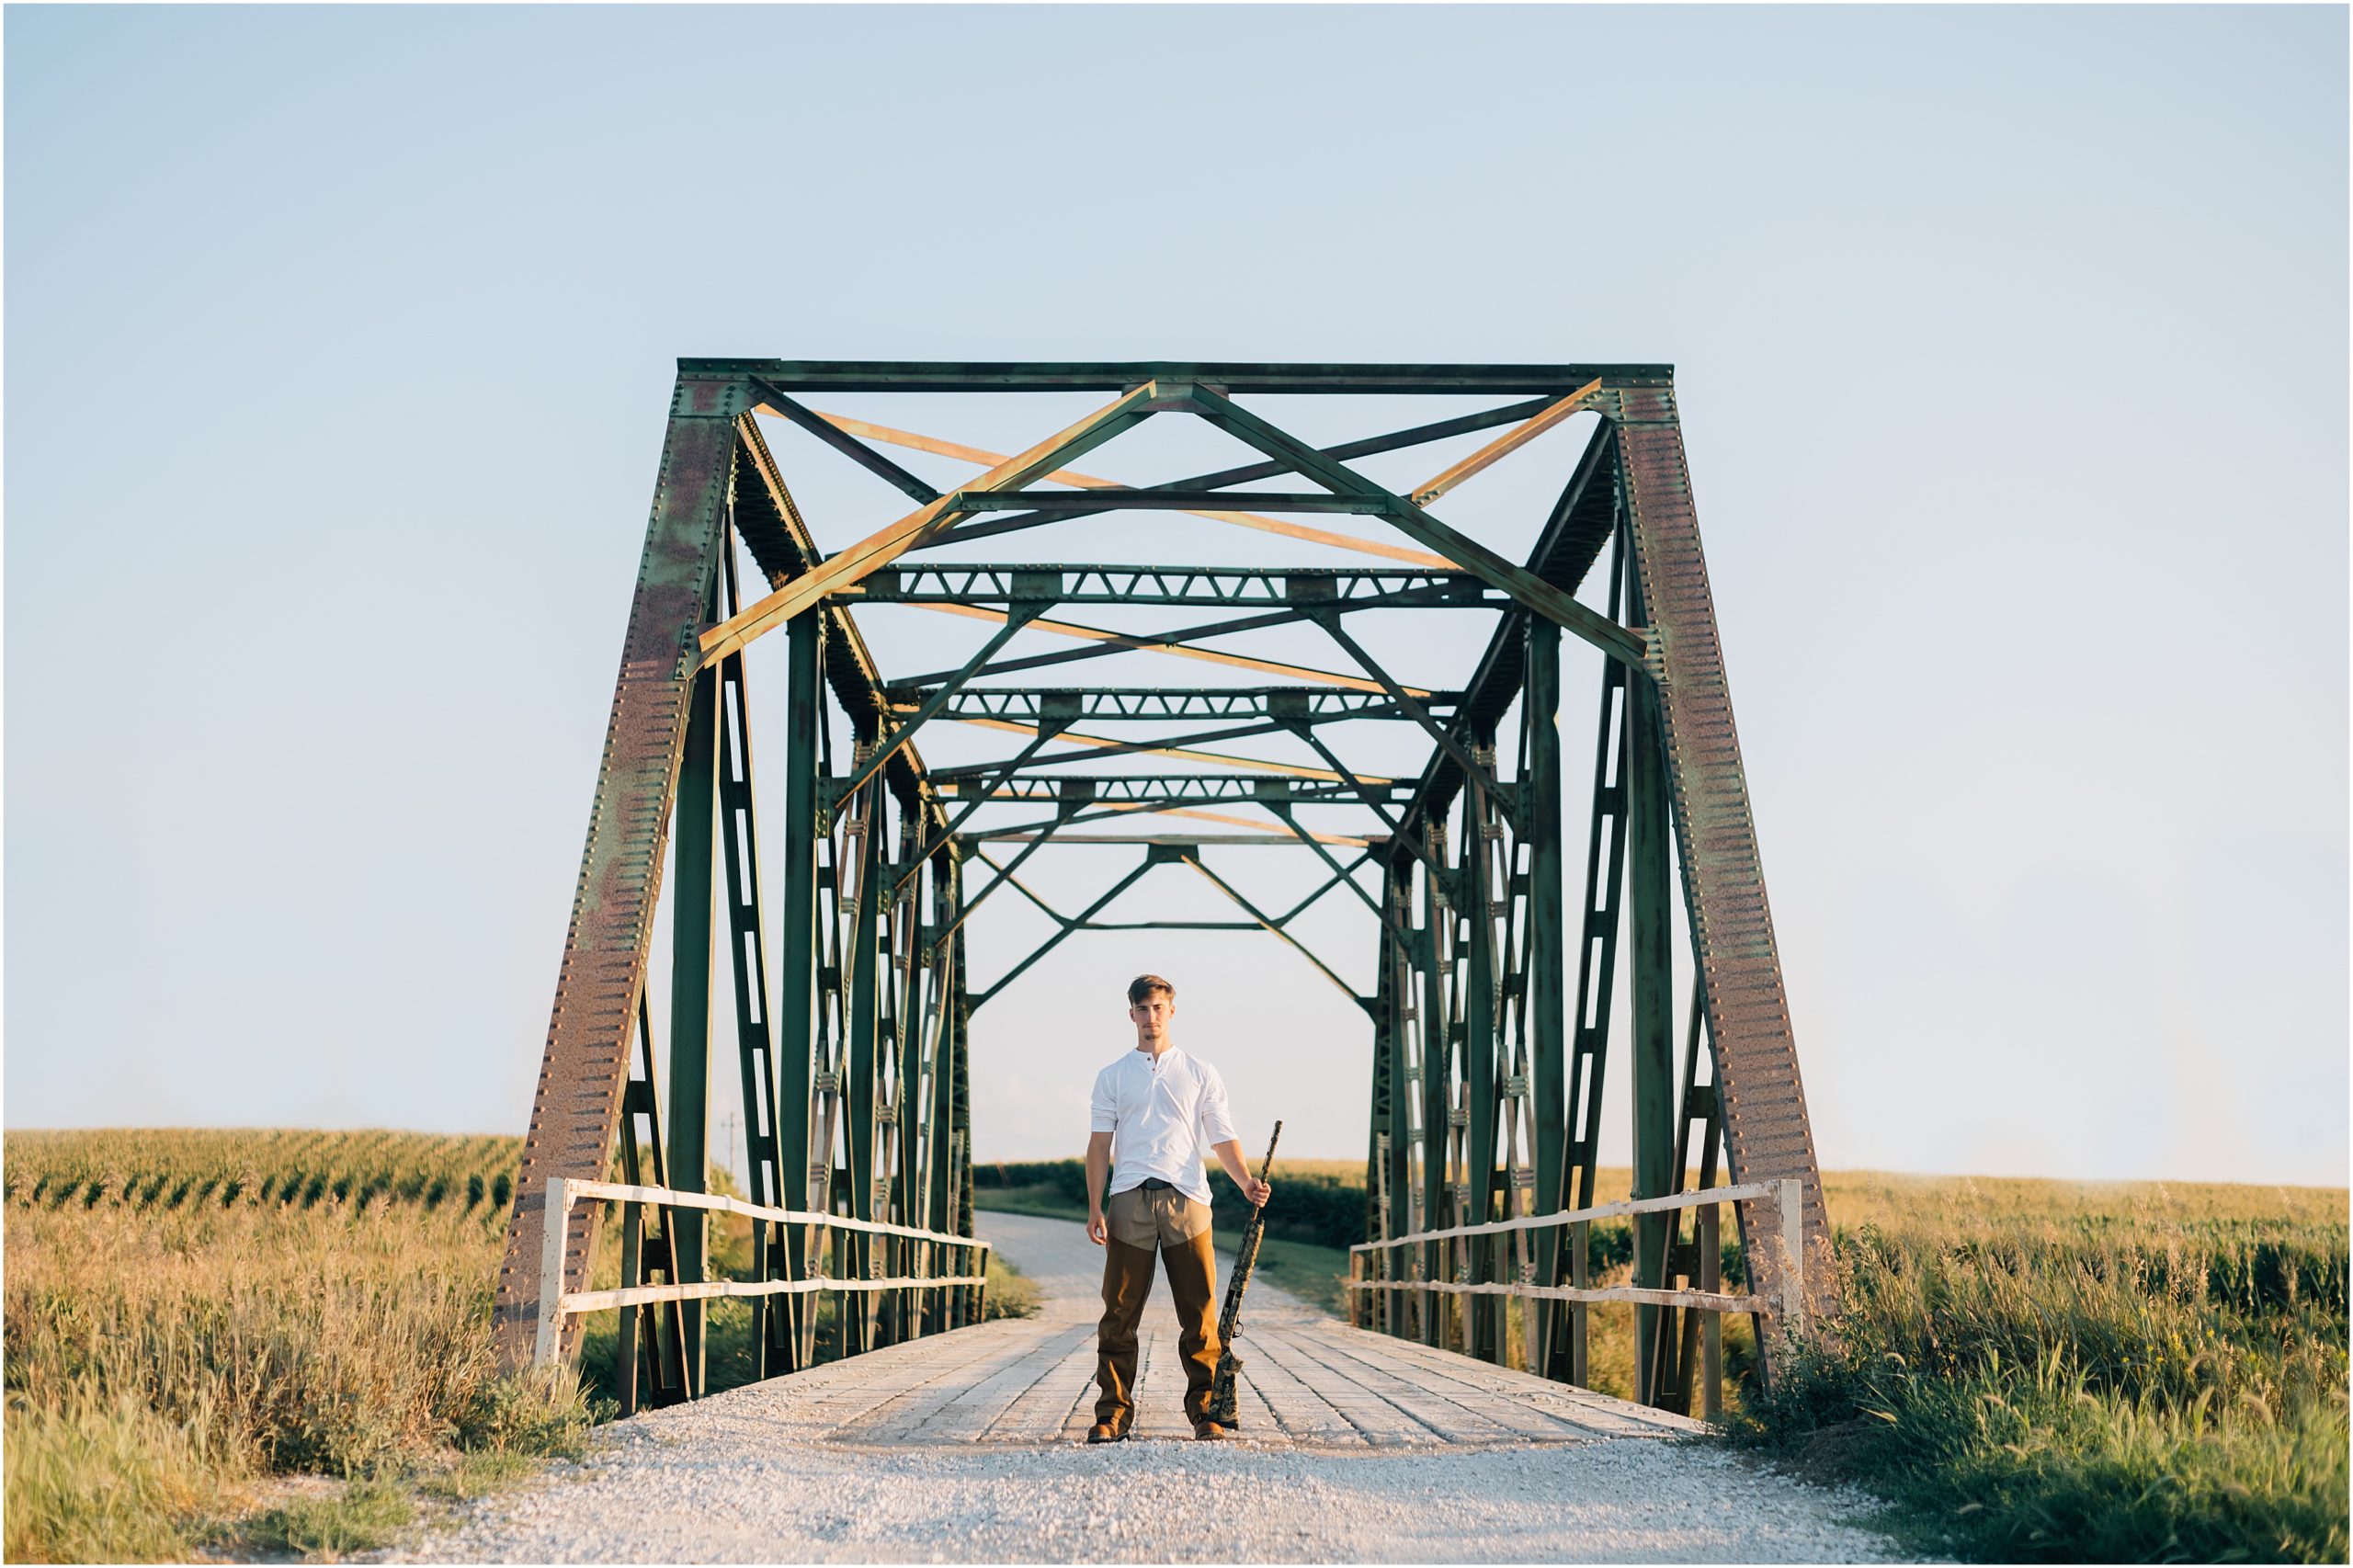 Photograph of an old green/brown bridge with a senior boy holding a gun in one hand. Boy is wearing white and brown. Photograph by Harlan Iowa photographer, Anna Brace.